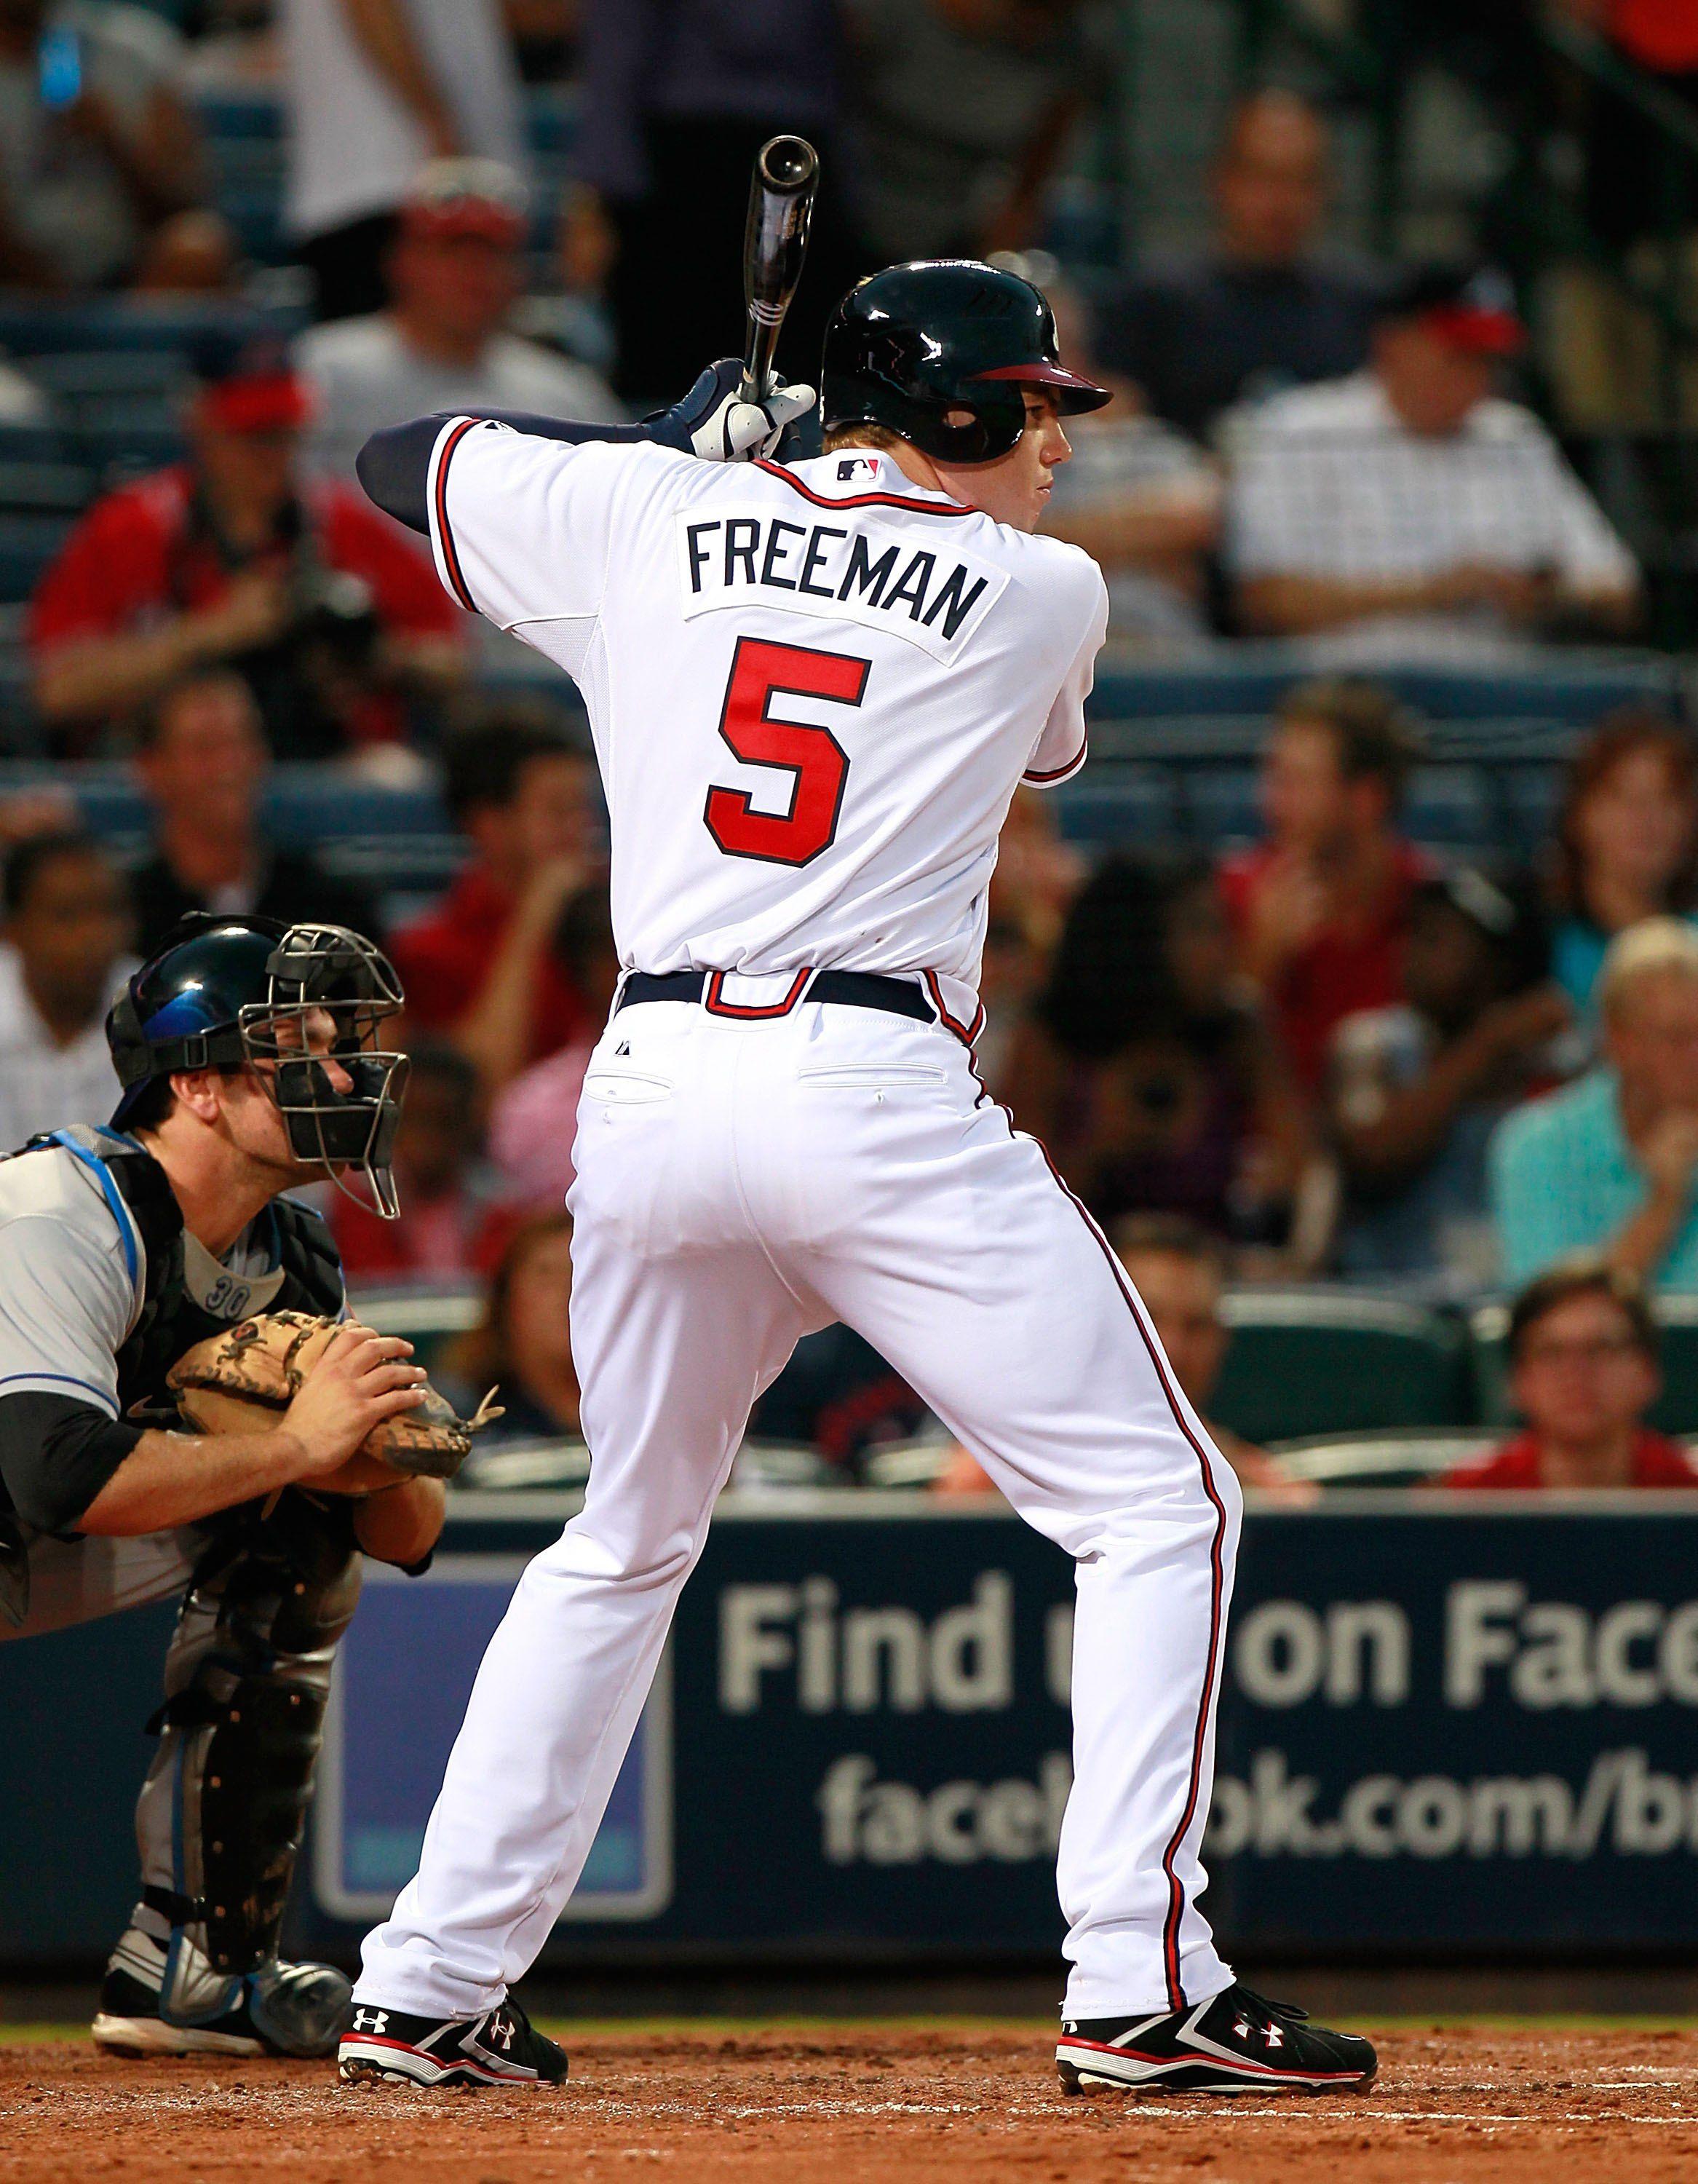 Freddie Freeman reaches agreement with Los Angeles Dodgers on sixyear  162 million deal sources say  ESPN